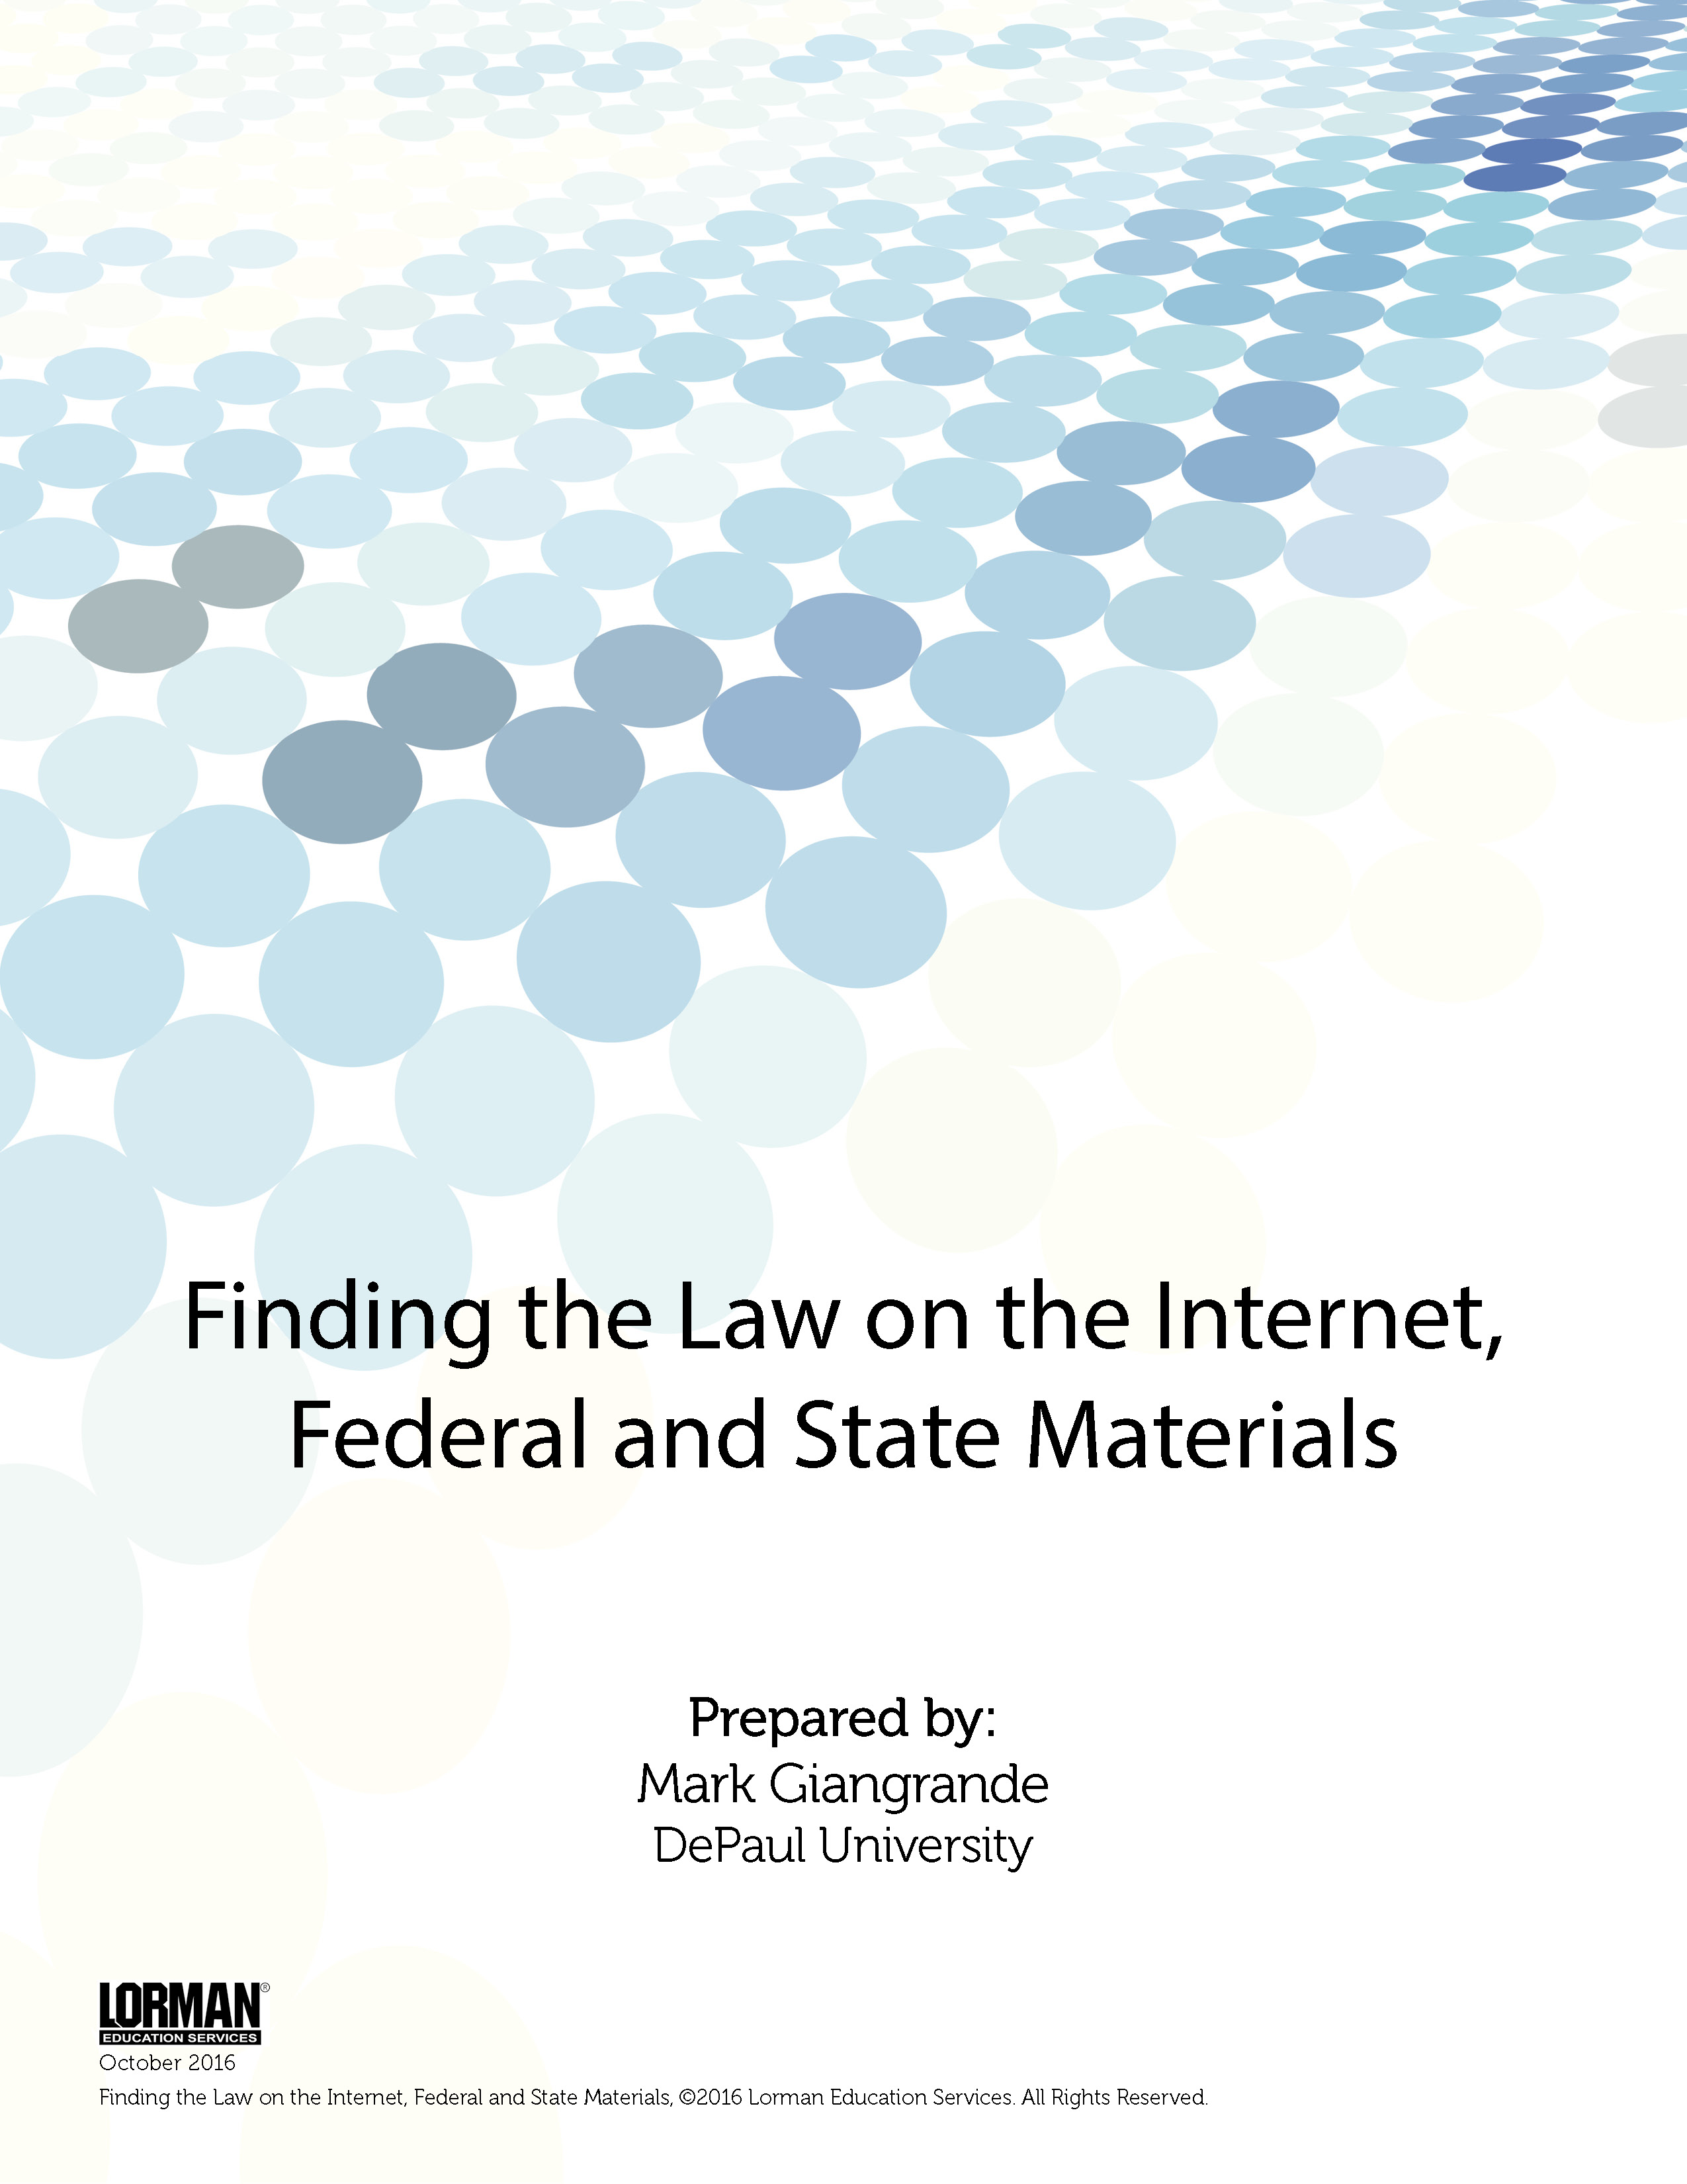 Finding the Law on the Internet, Federal and State Materials